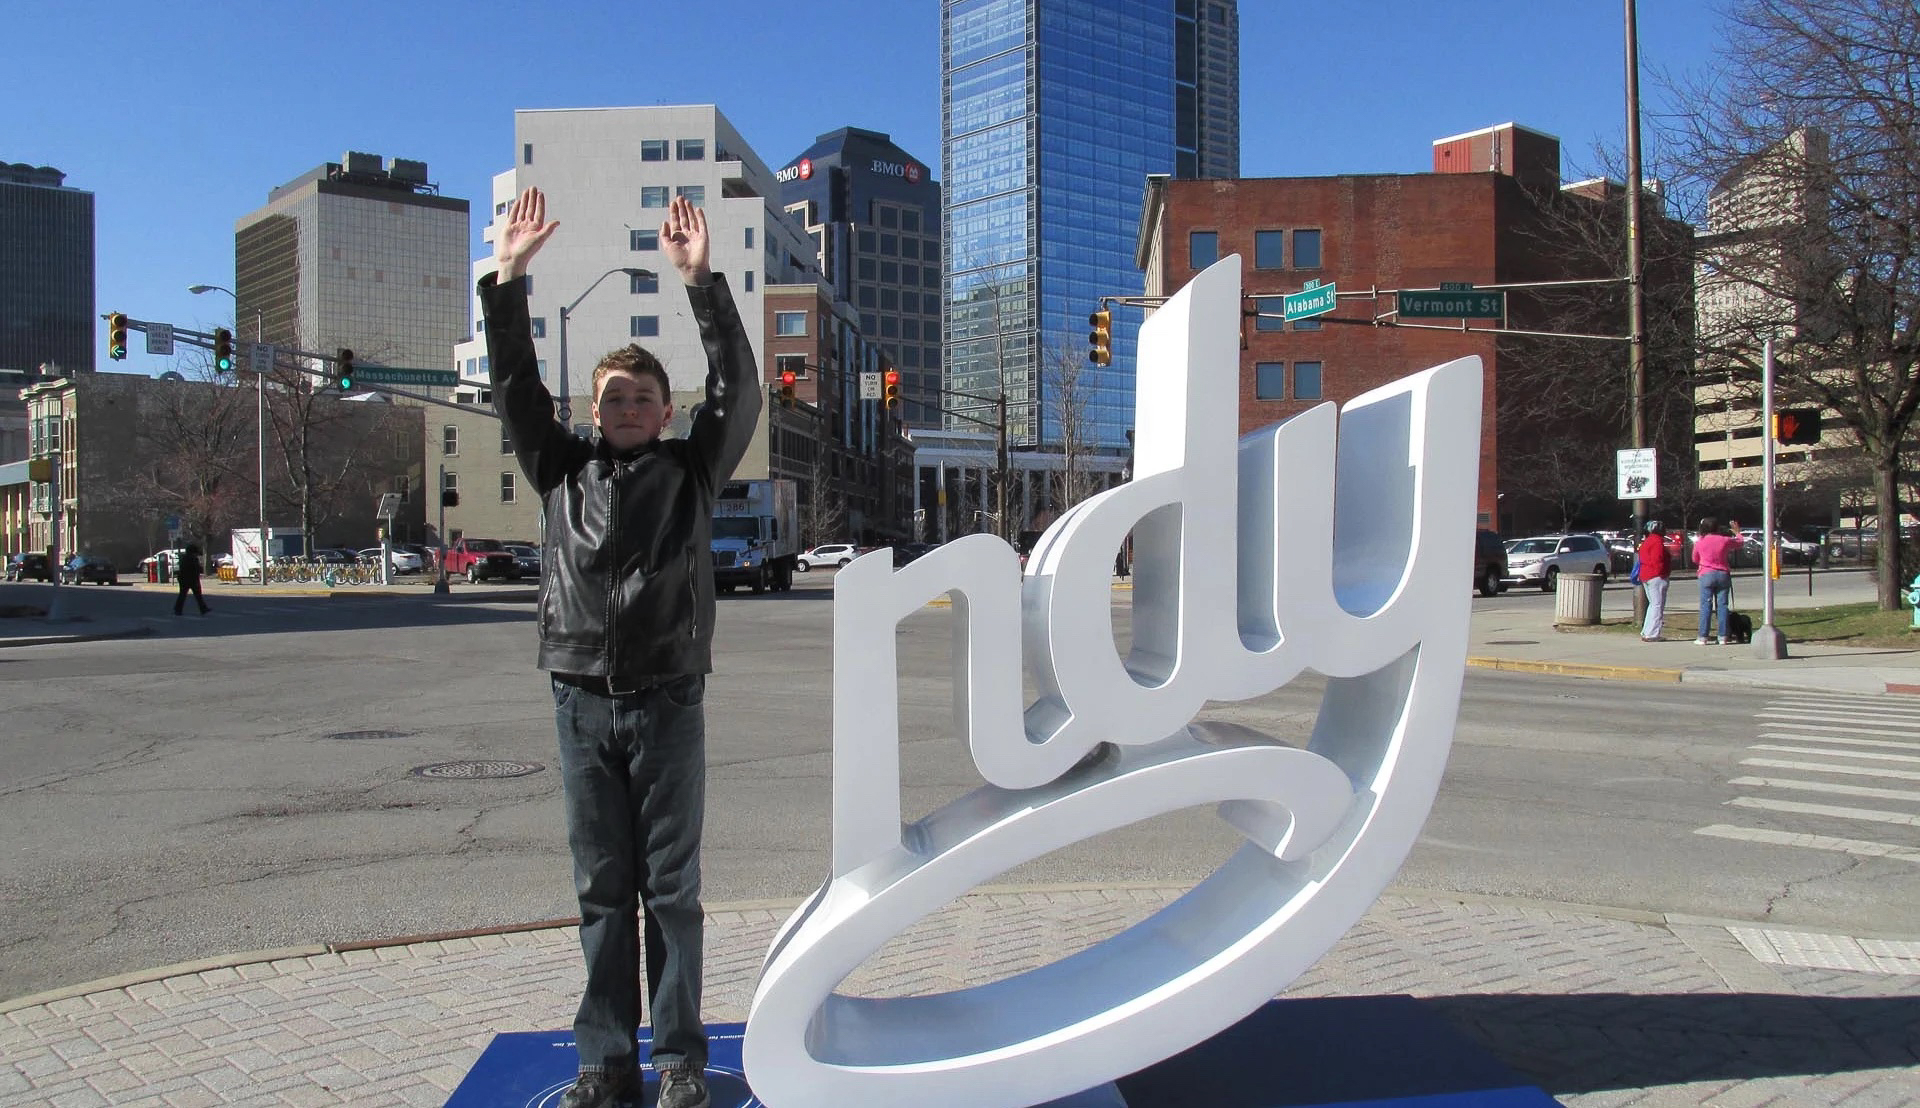 A young person of light skin tone in dark clothing raises both their hands up in the air as they stand next to a public artwork that spells 'ndy' in lower case cursive lettering. The person stands in for the letter 'I' to spell out 'Indy' for Indianapolis, where the public art exists.